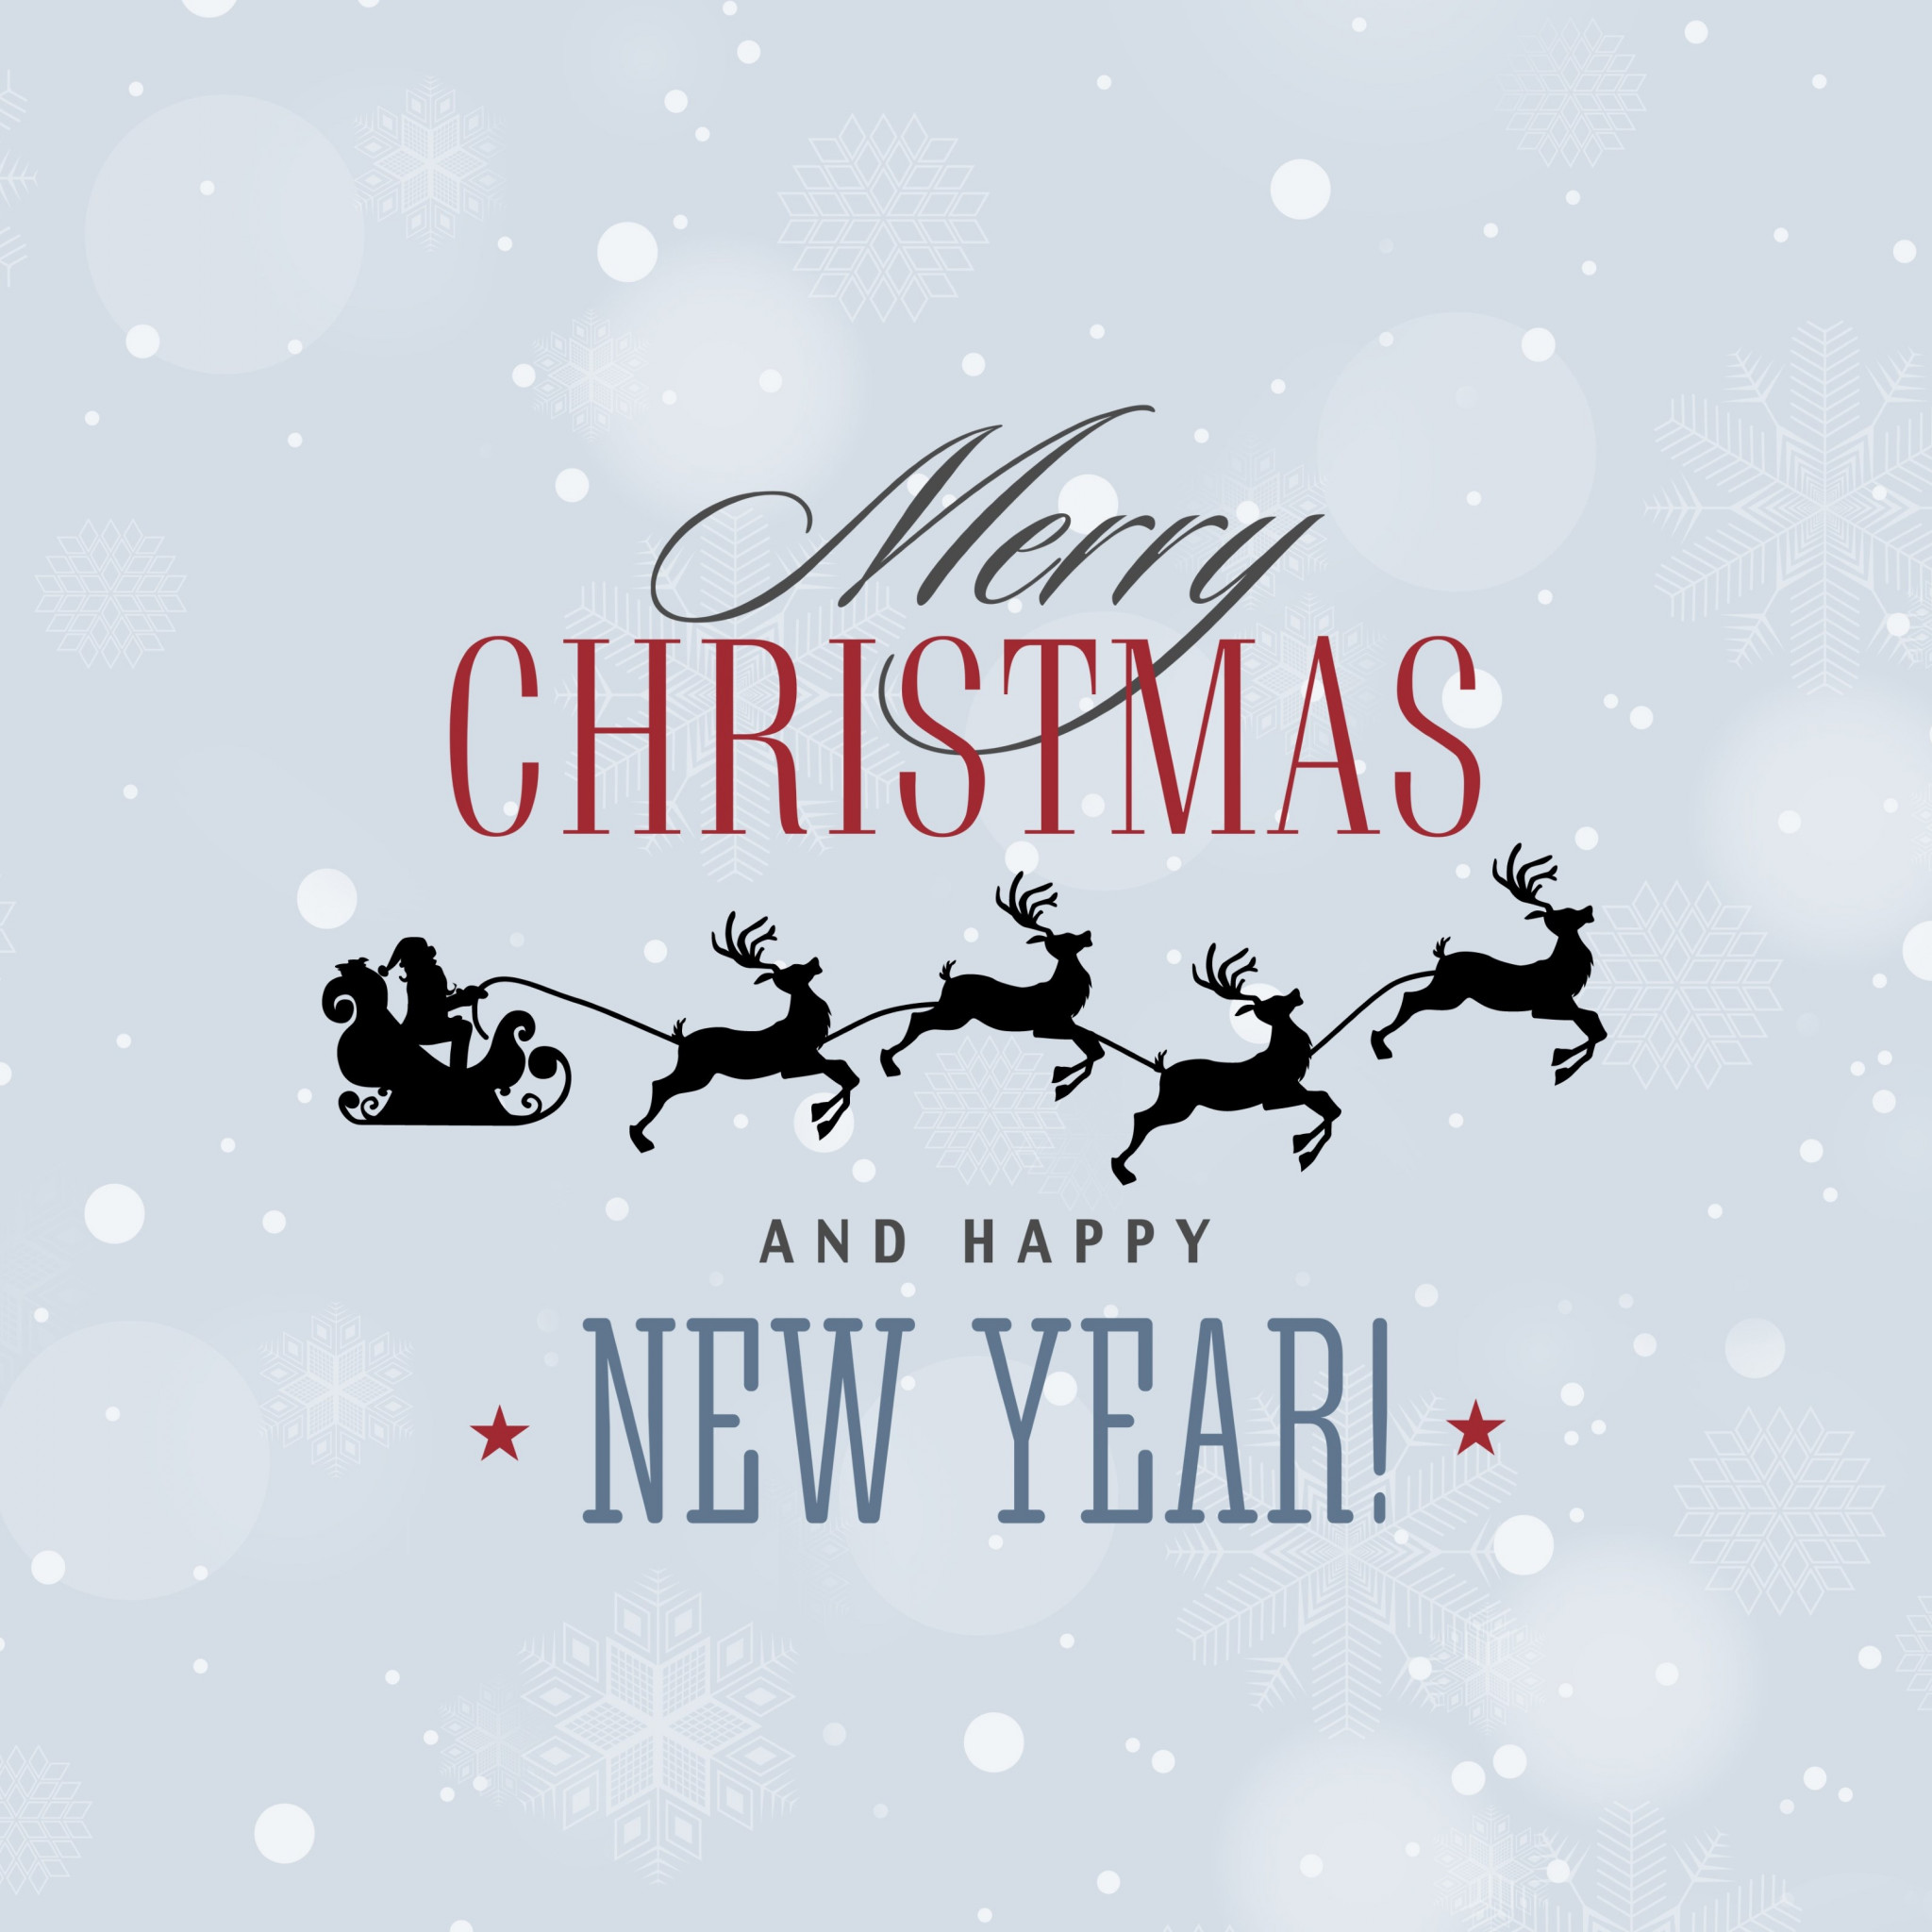 Merry Christmas and a Happy New Year wallpaper 2048x2048